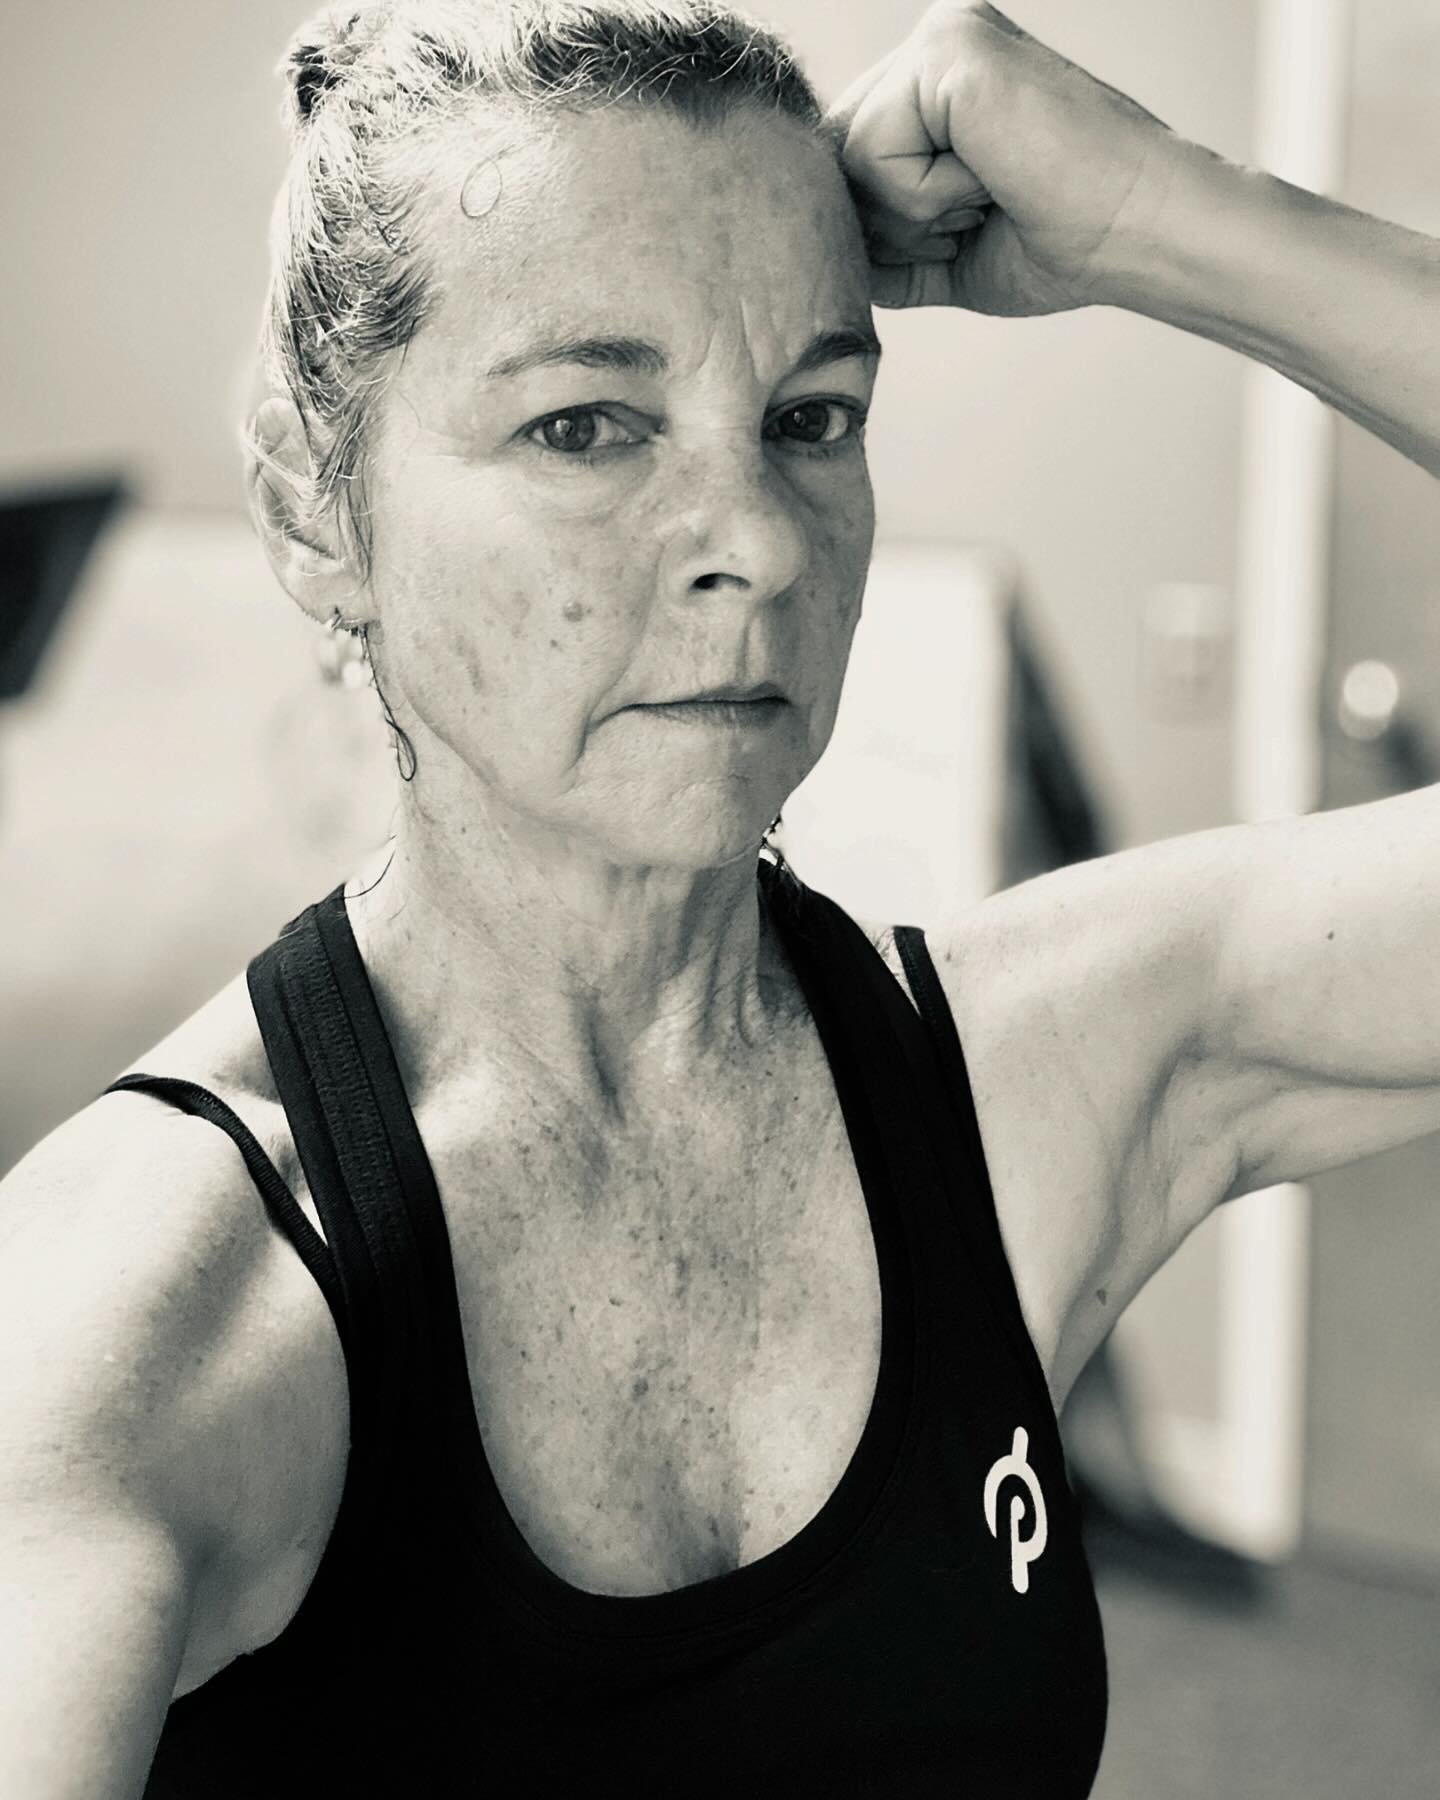 I&rsquo;m sharing this photo because I am proud of my almost 60 years of life. I know my body is changing, I have a thicker mid section and skin that reminds me of tissue paper but I am strong. Mentally and physically. It takes work but I am grateful